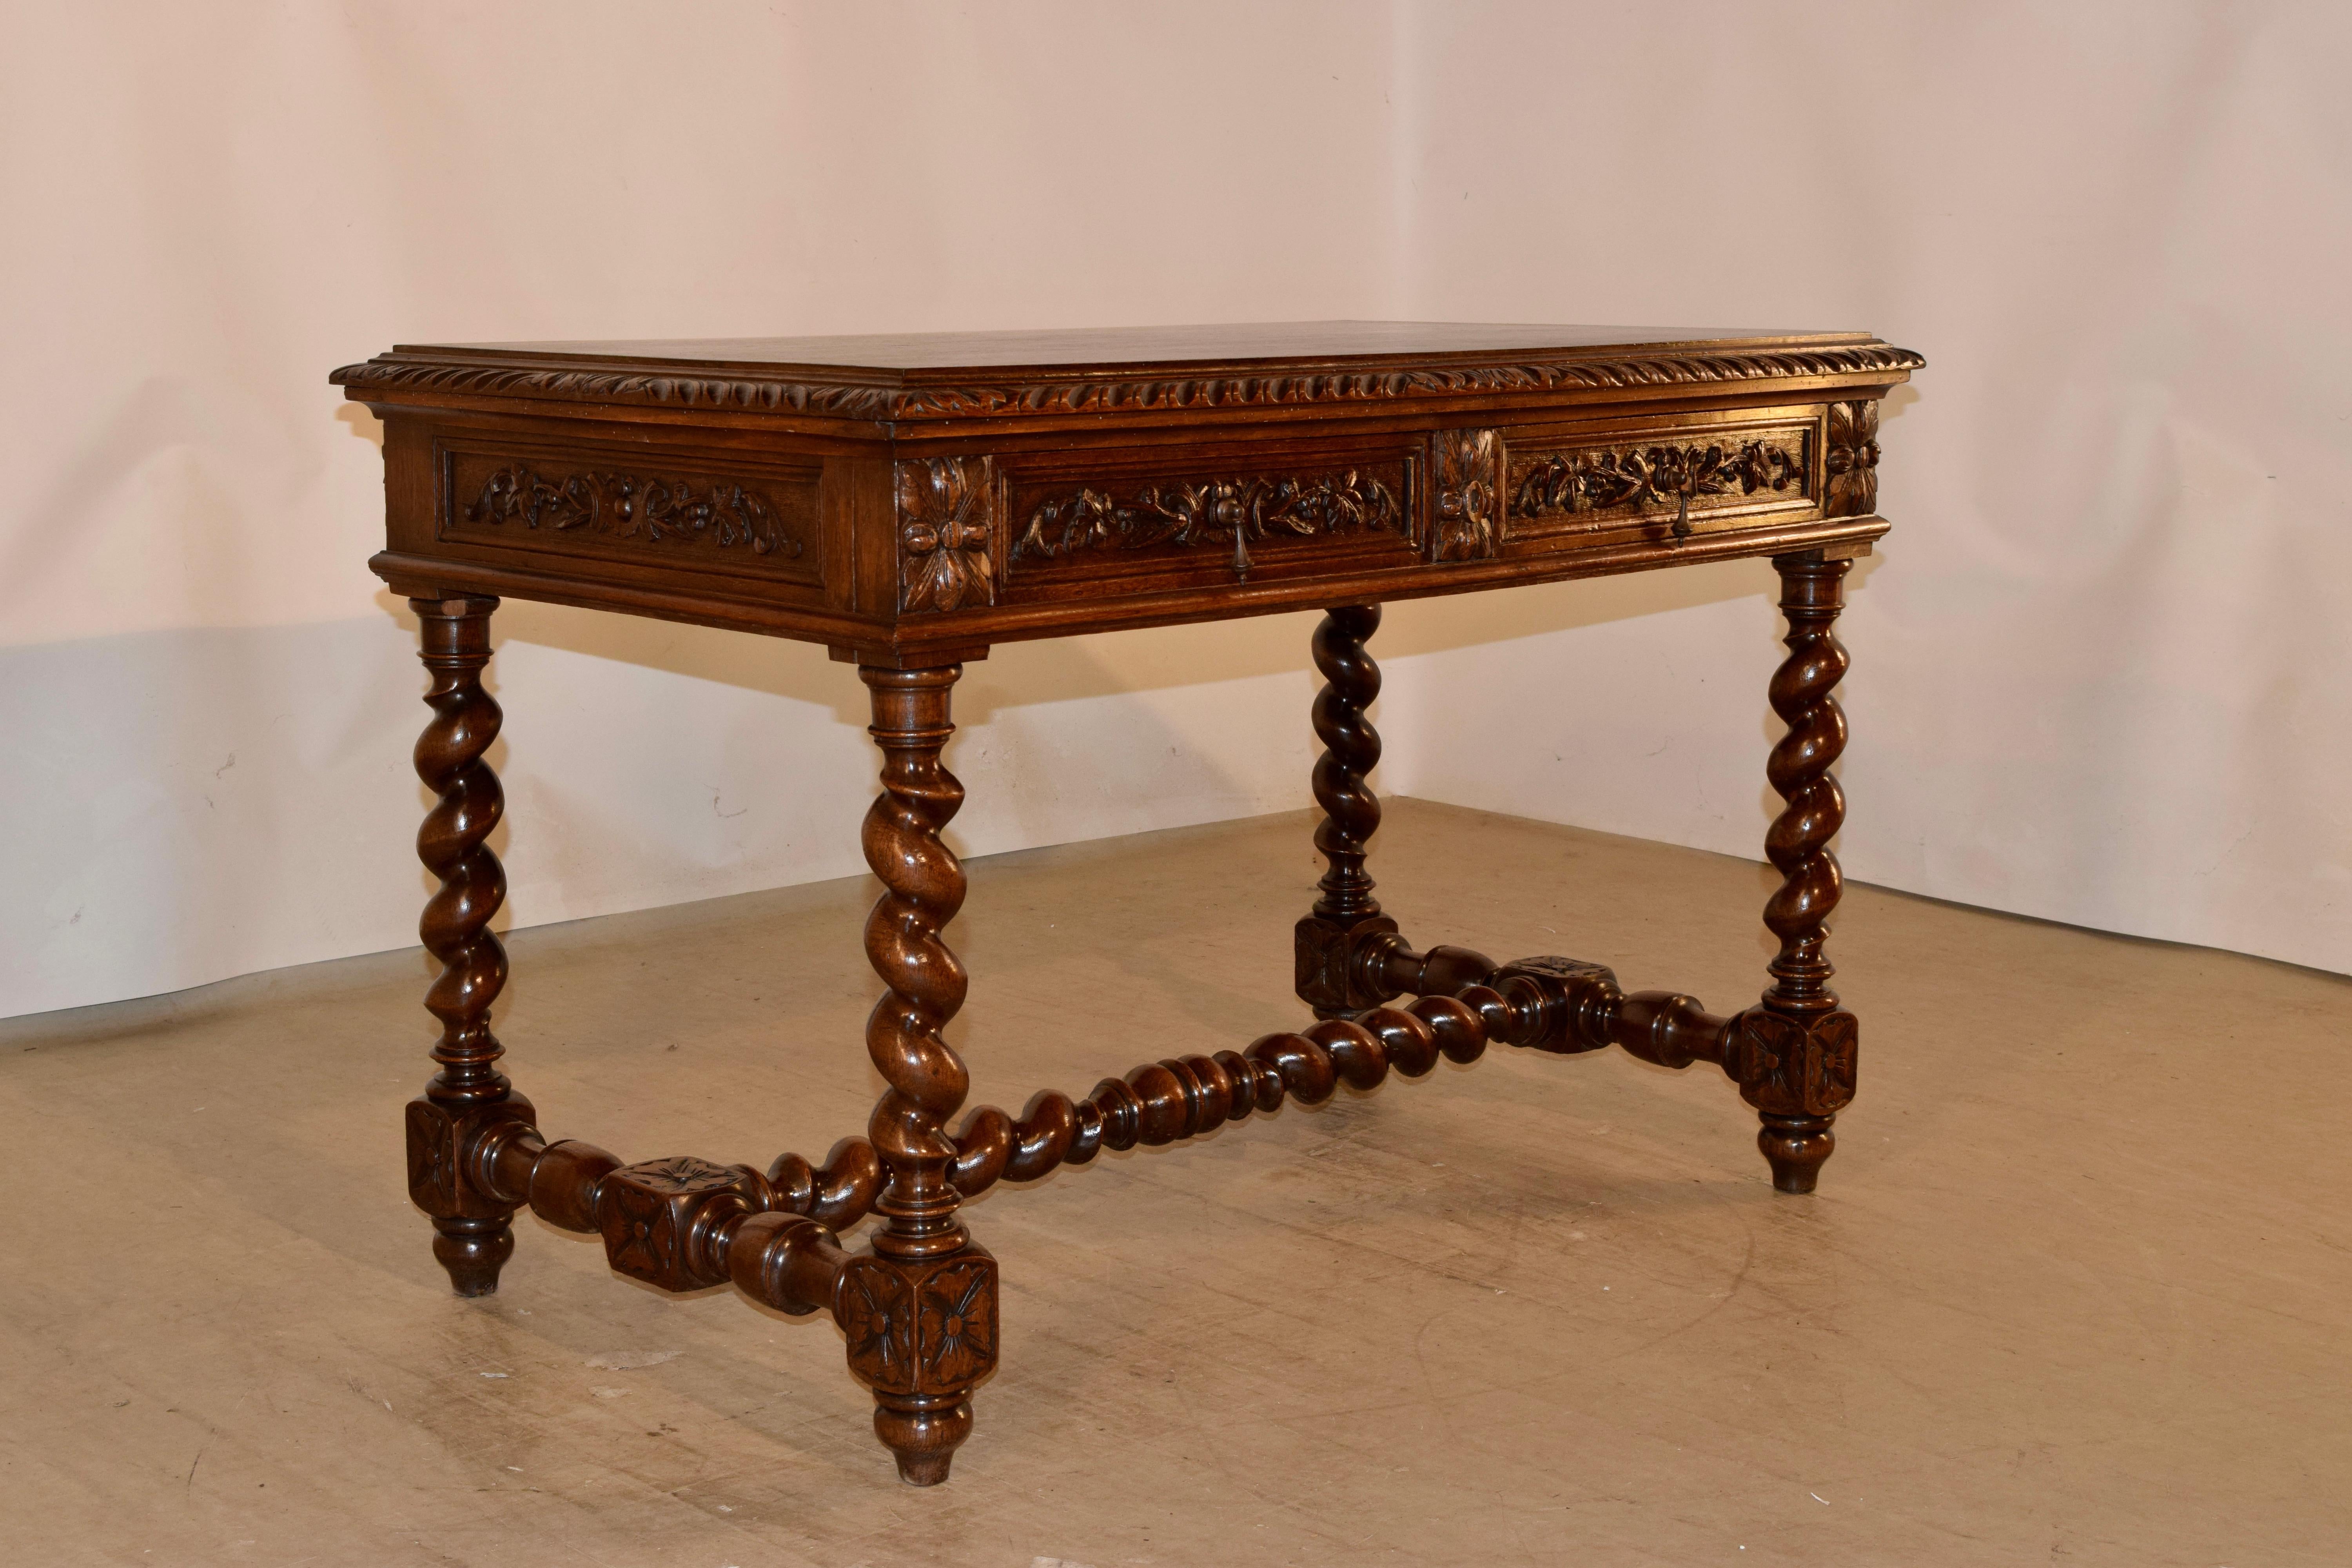 19th century oak writing desk from France with a hand carved and beveled edge around the top over a molded and hand carved decorated apron on all four sides for easy placement in any room. There are two paneled and hand carved drawers in the front